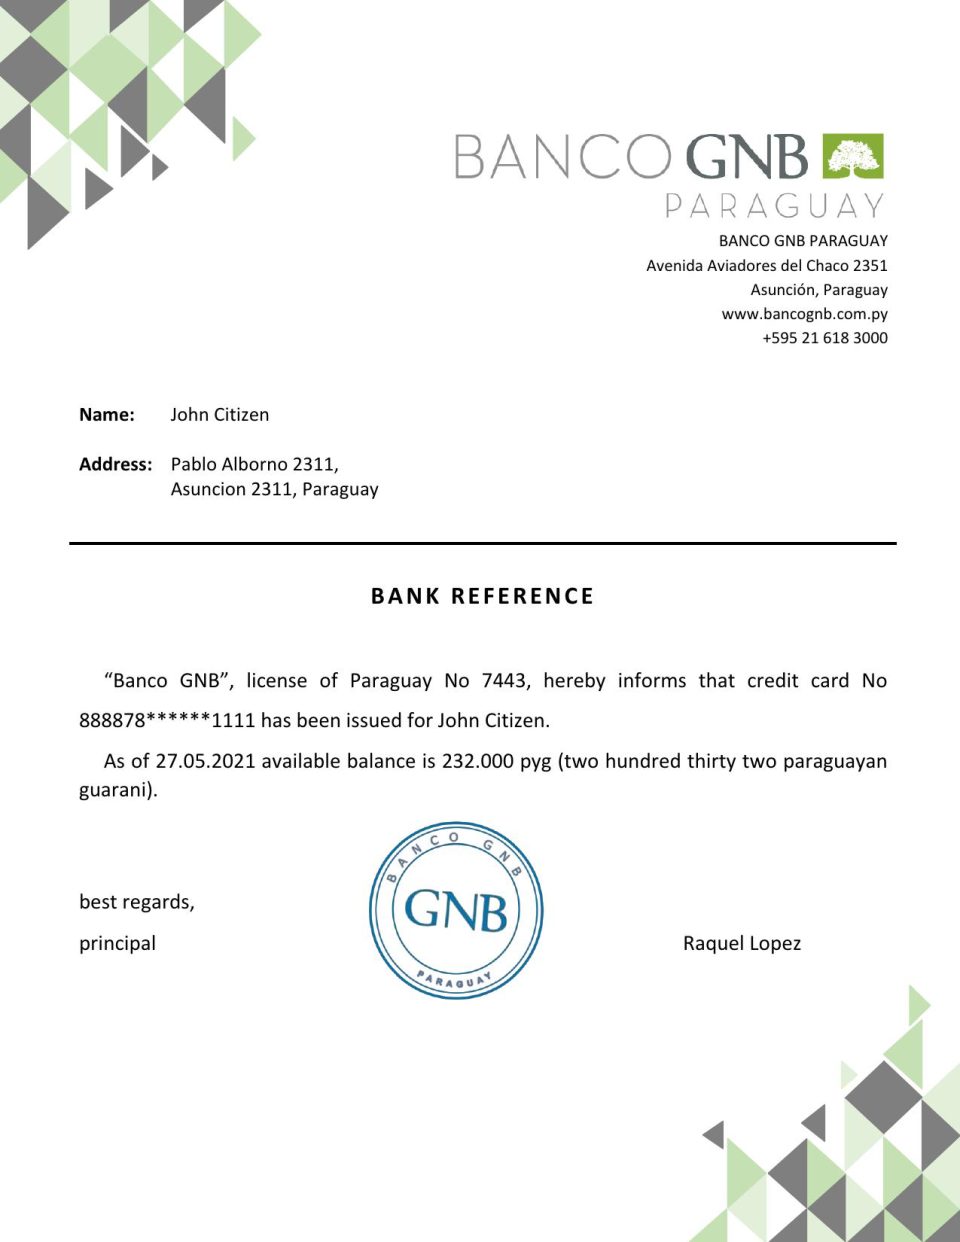 Download Paraguay Banco GNB Bank Reference Letter Templates | Editable Word